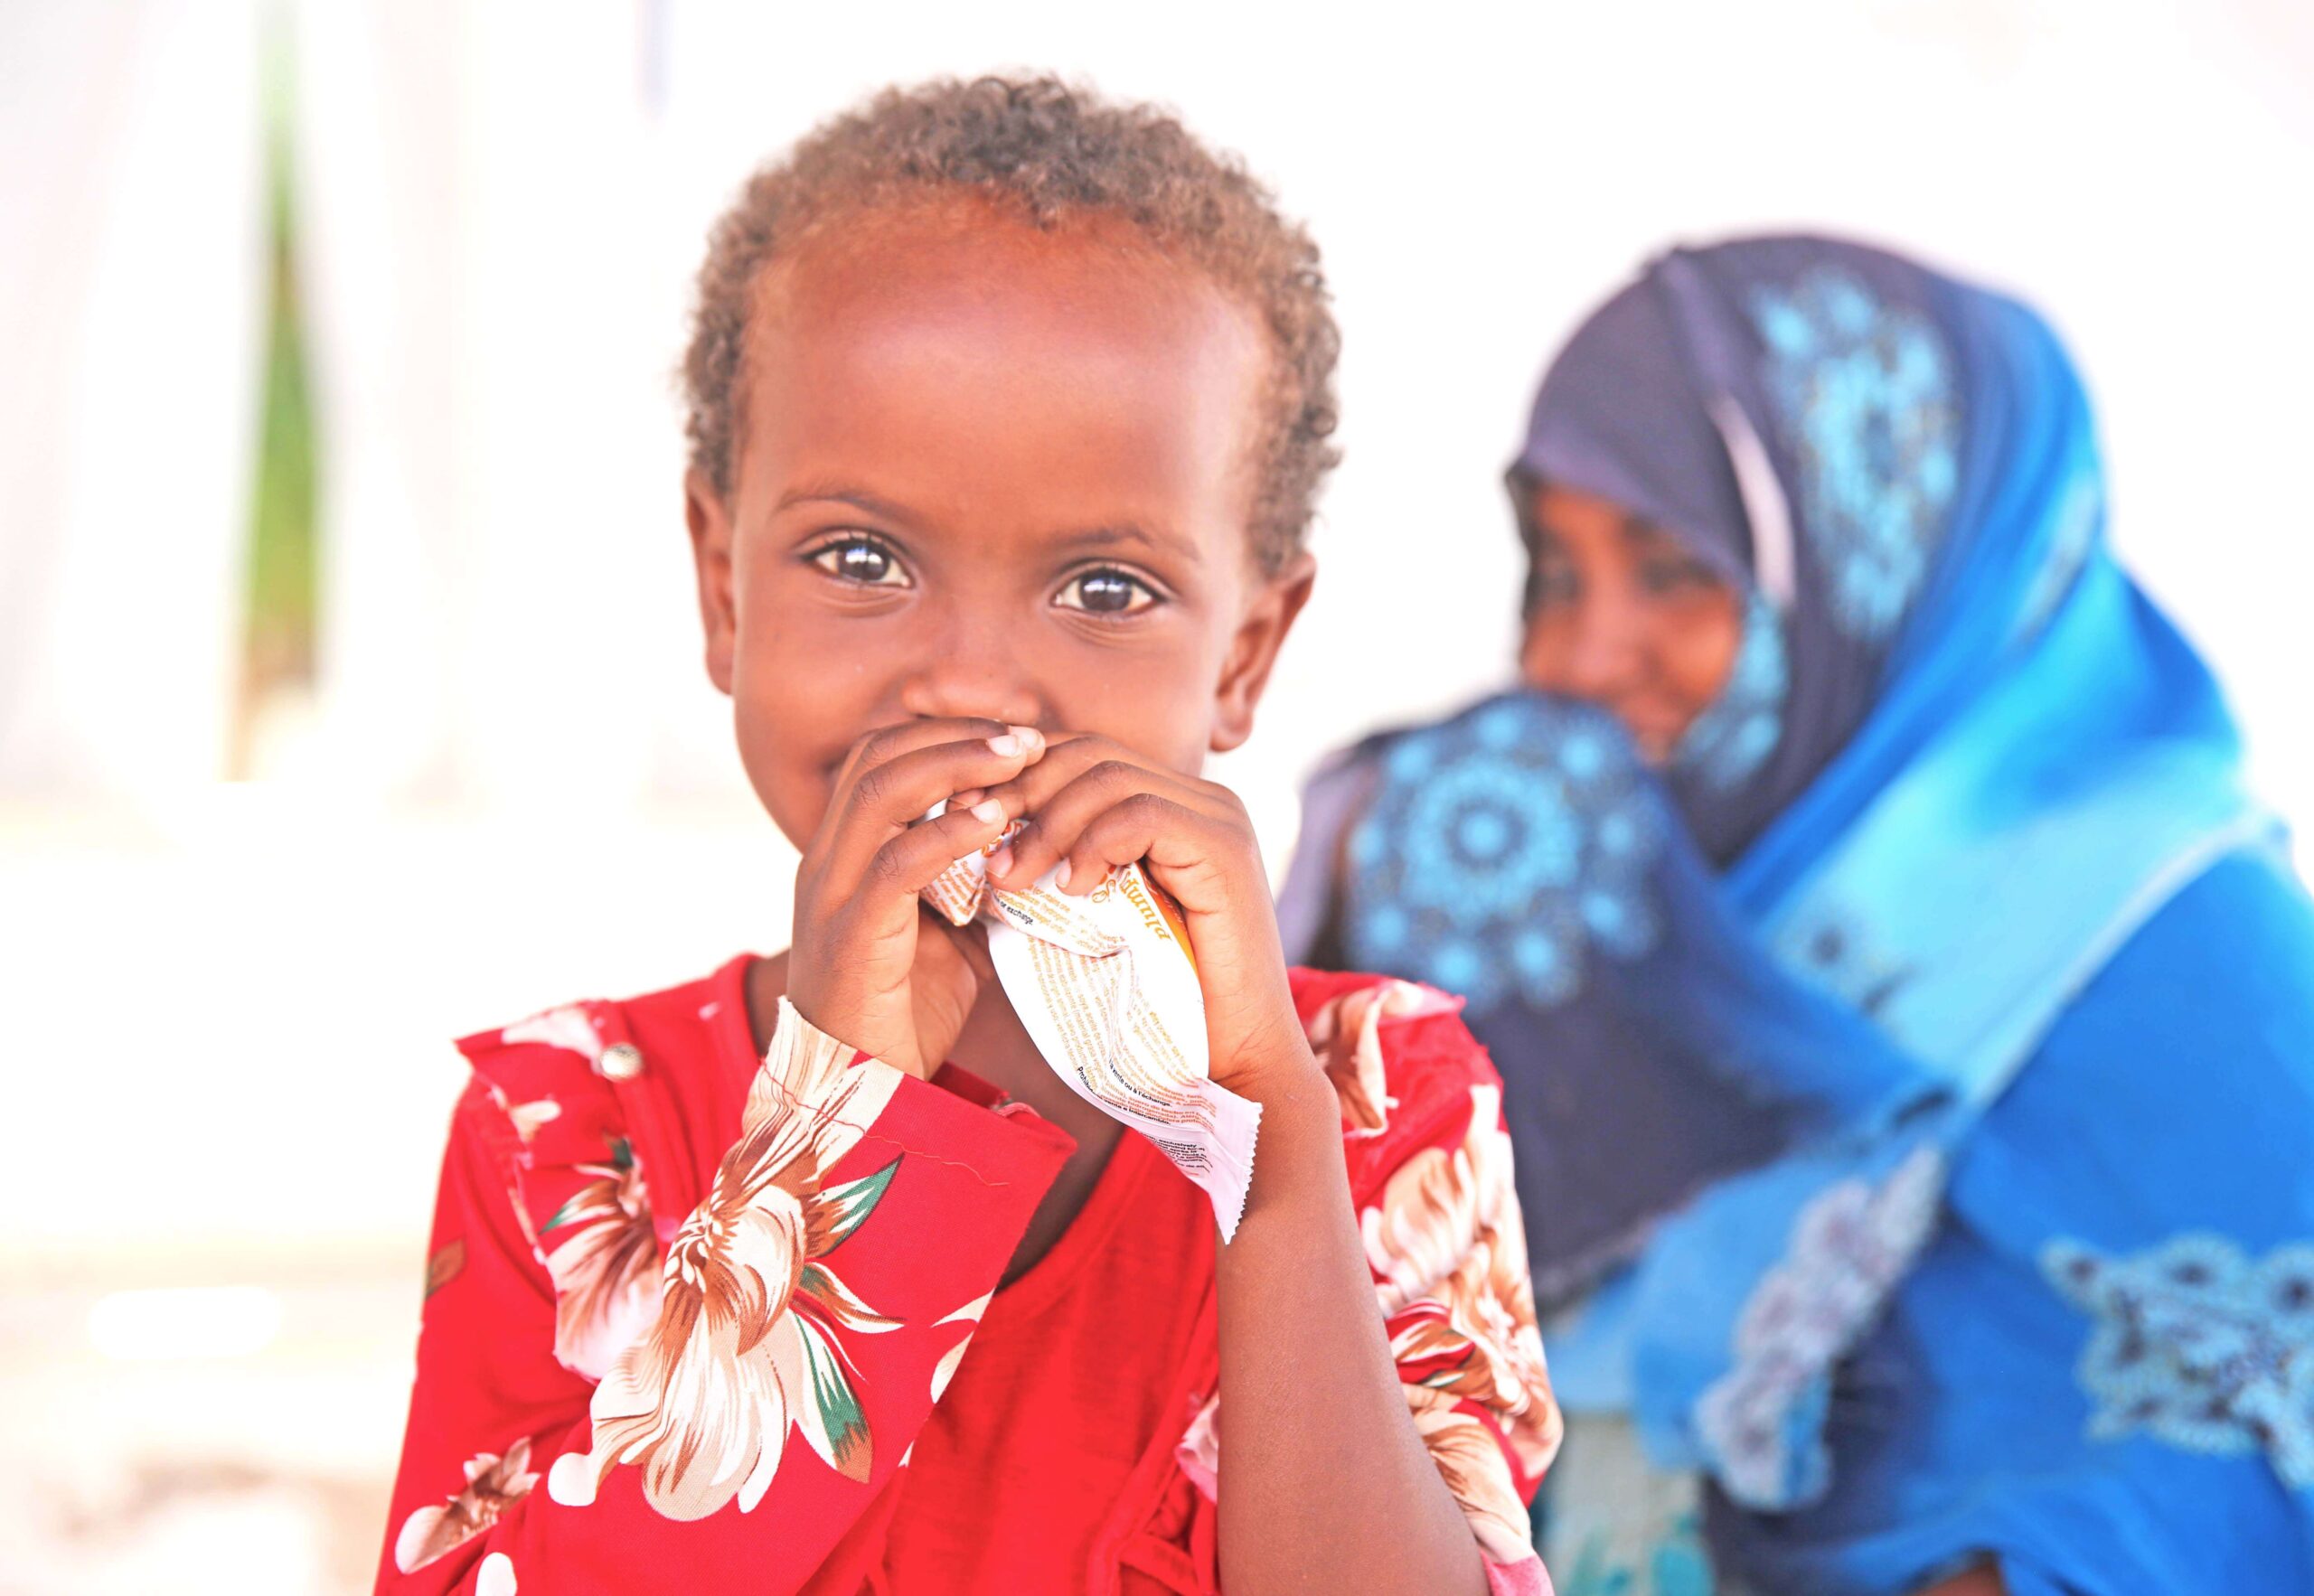 Anissa was suffering from malnutrition when she came to Galkayo South Hospital, Somalia.